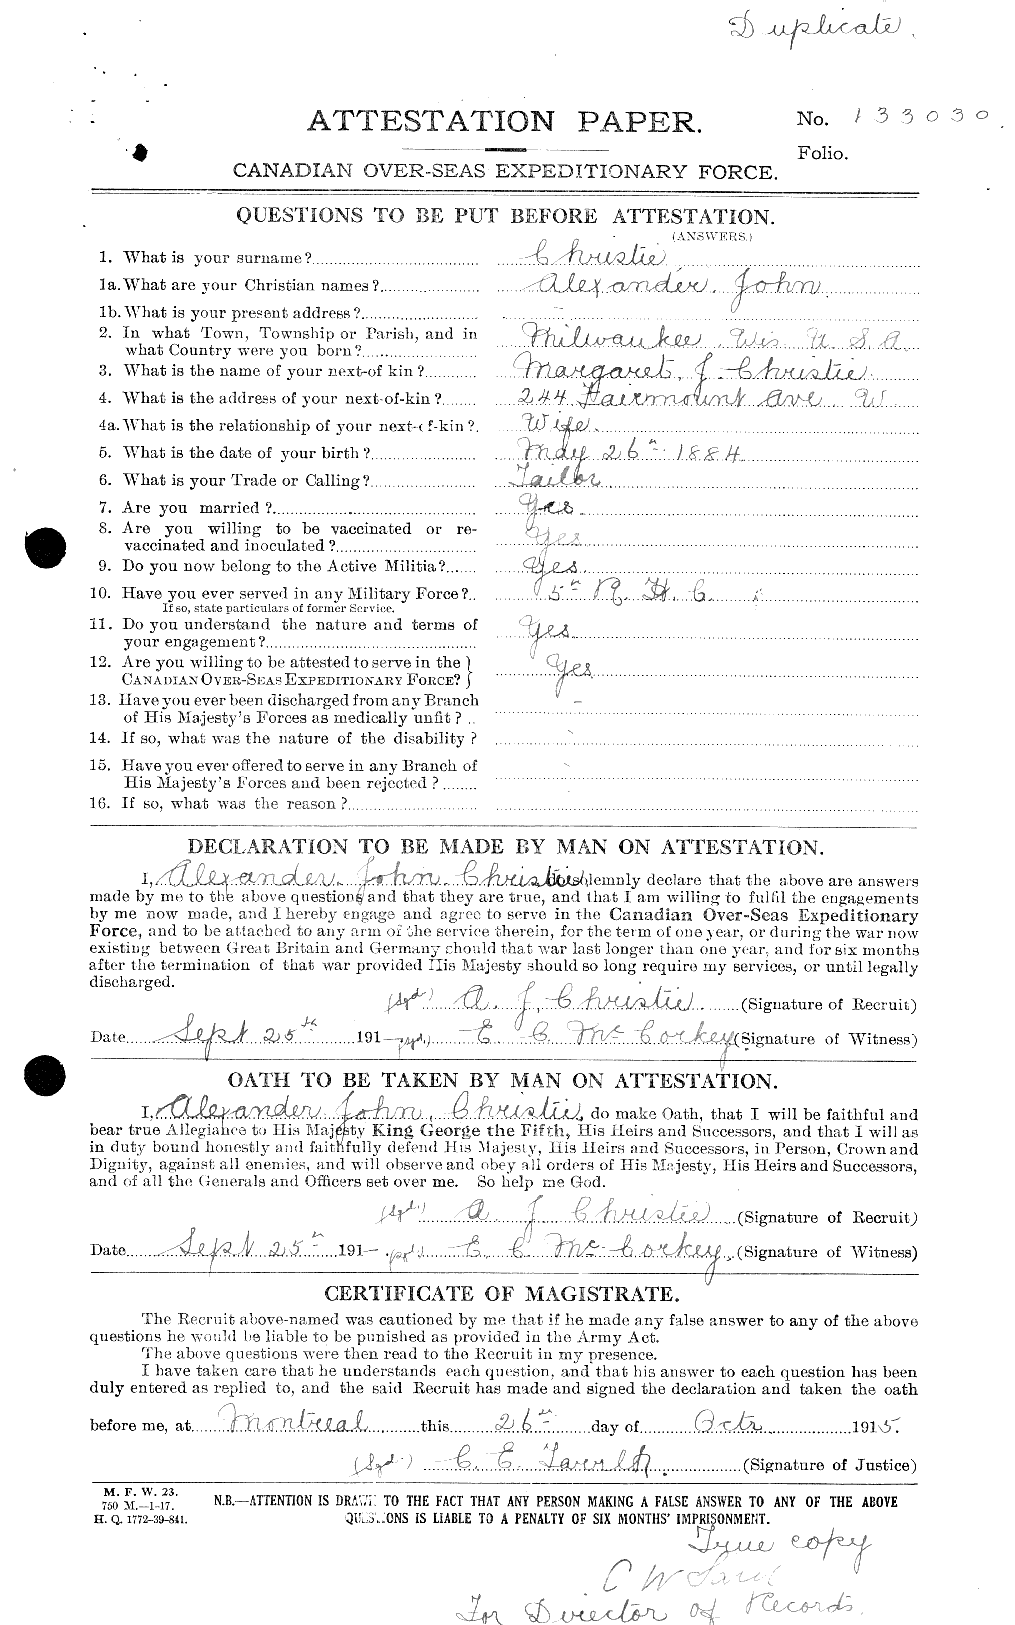 Personnel Records of the First World War - CEF 021864c